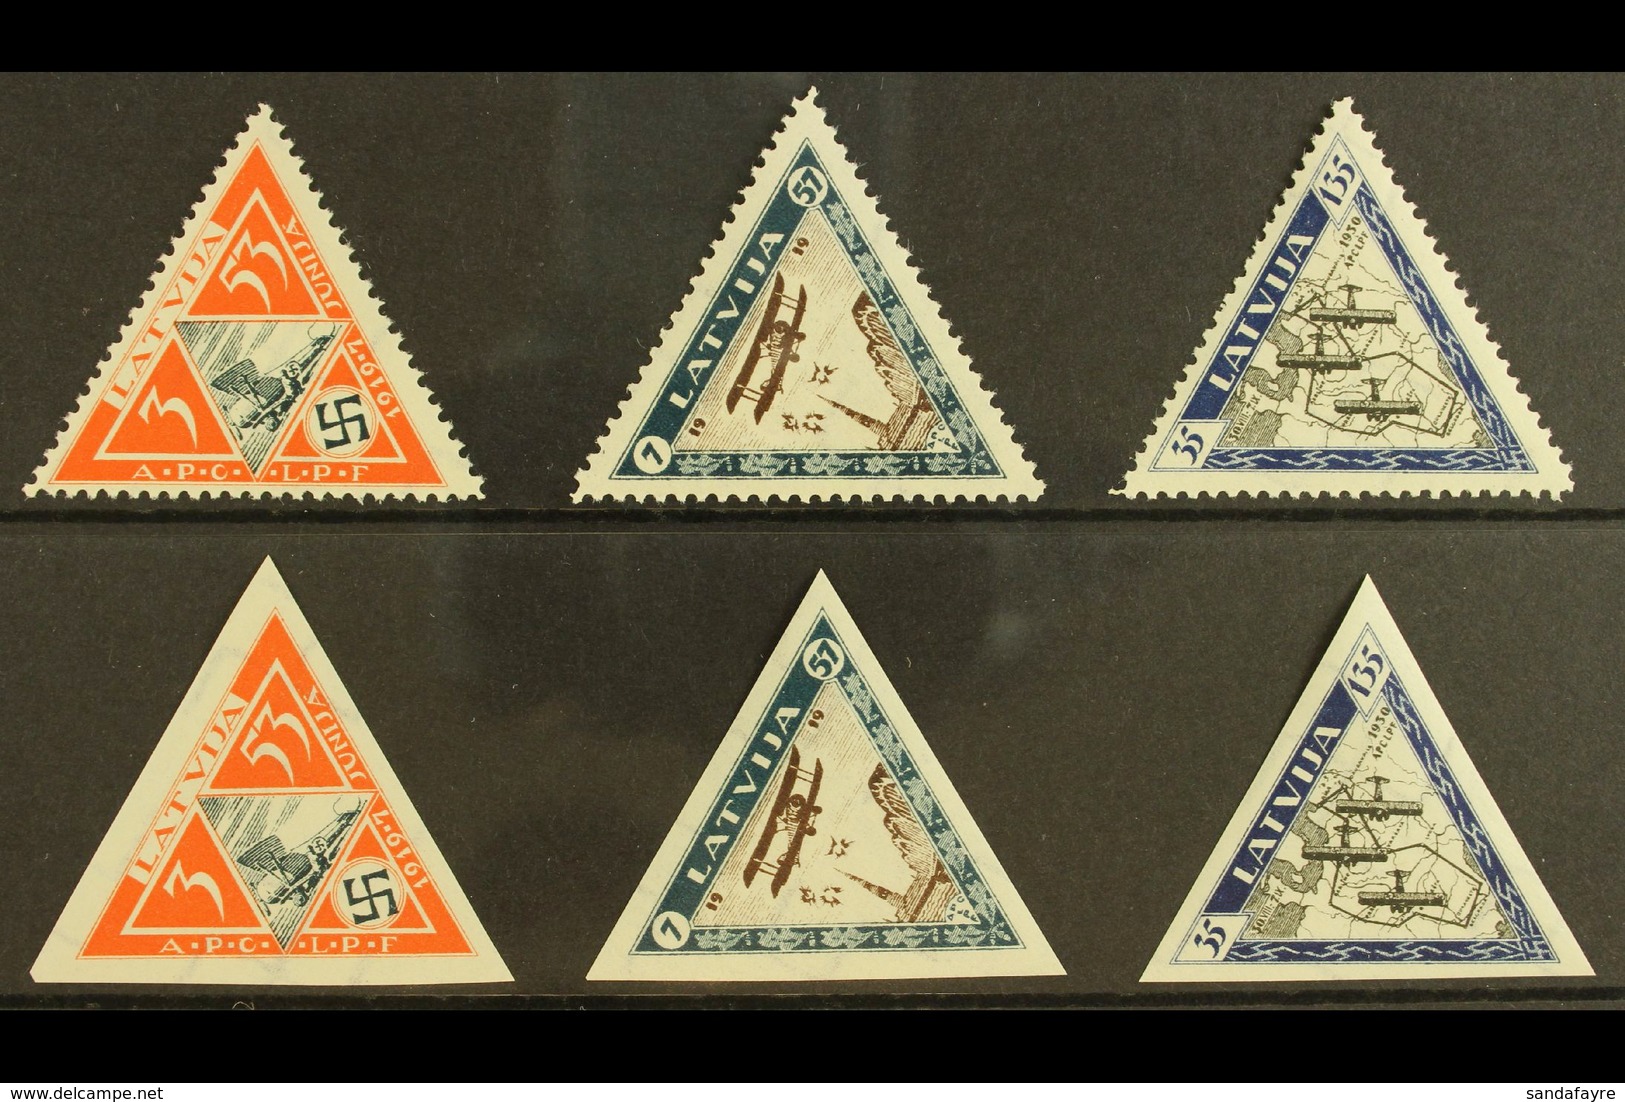 1933 Wounded Airmen Triangular Perforated & Imperforate Sets, Mi 225A/227A & 225B/227B, SG 240A/42A & 240B/42B, Fine Min - Latvia